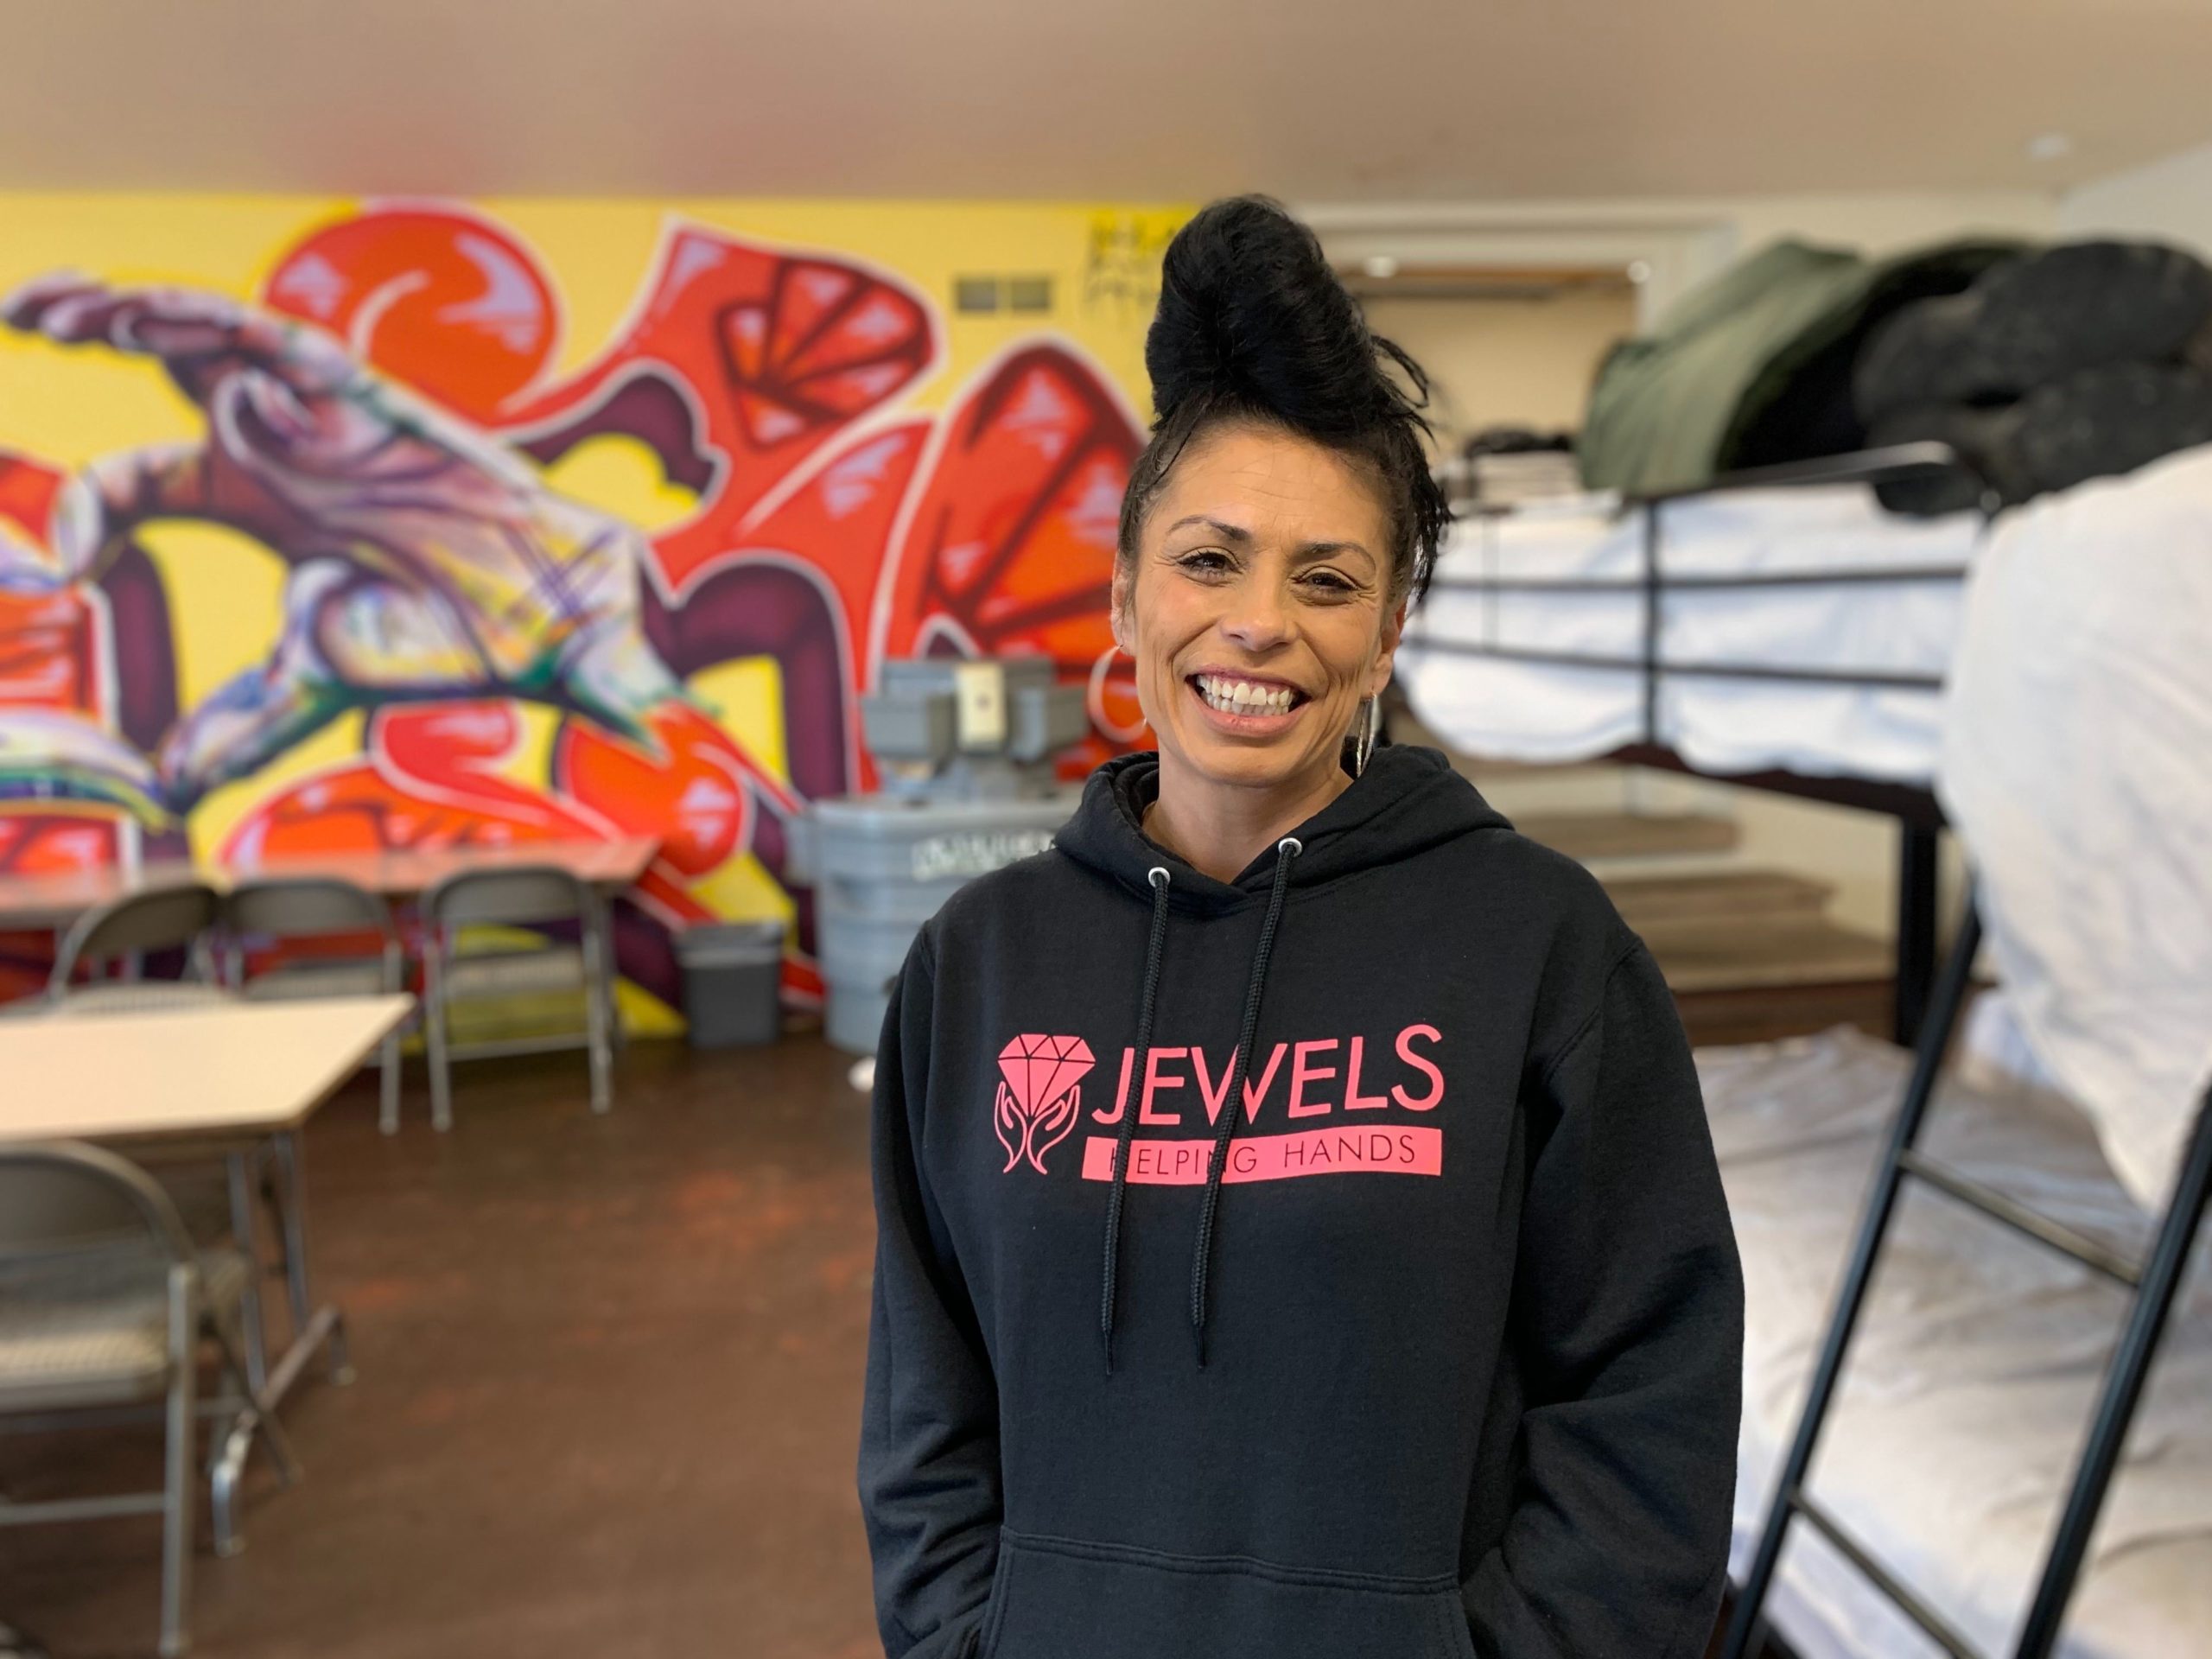 Julia Garcia started the nonprofit Jewels Helping Hands, which began by operating mobile shower units to serve Spokane's growing homeless population. CREDIT: Kirk Siegler/NPR